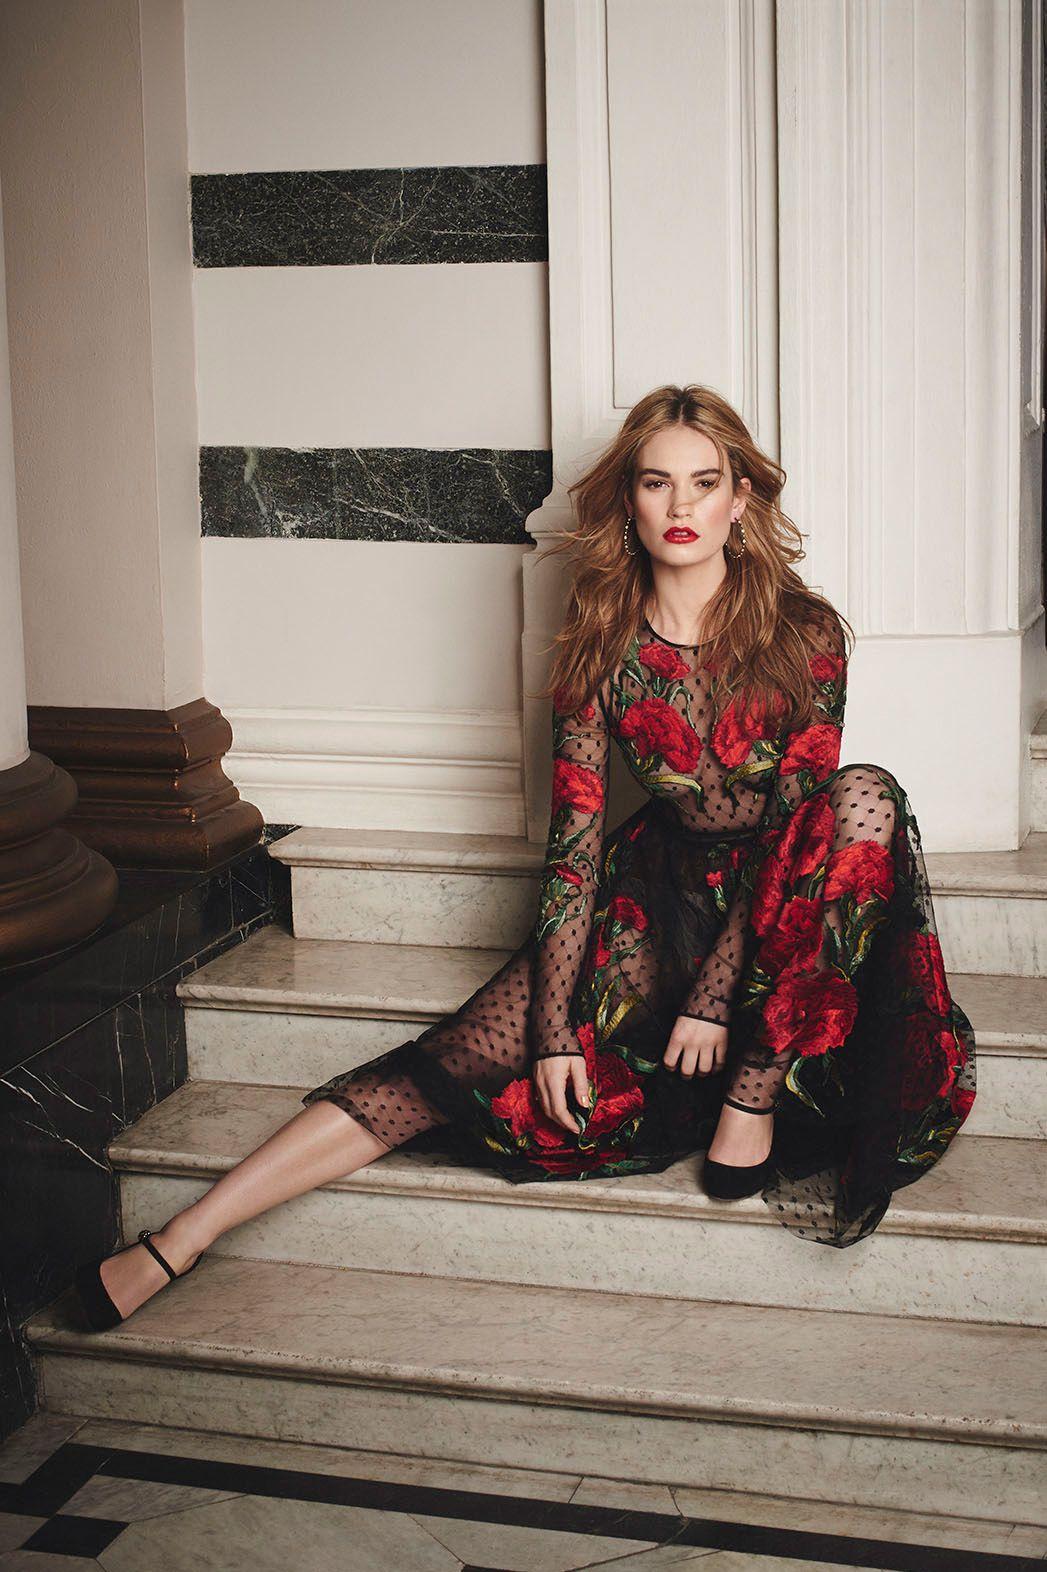 Fantastic Lily James Wallpaper. Full HD Picture